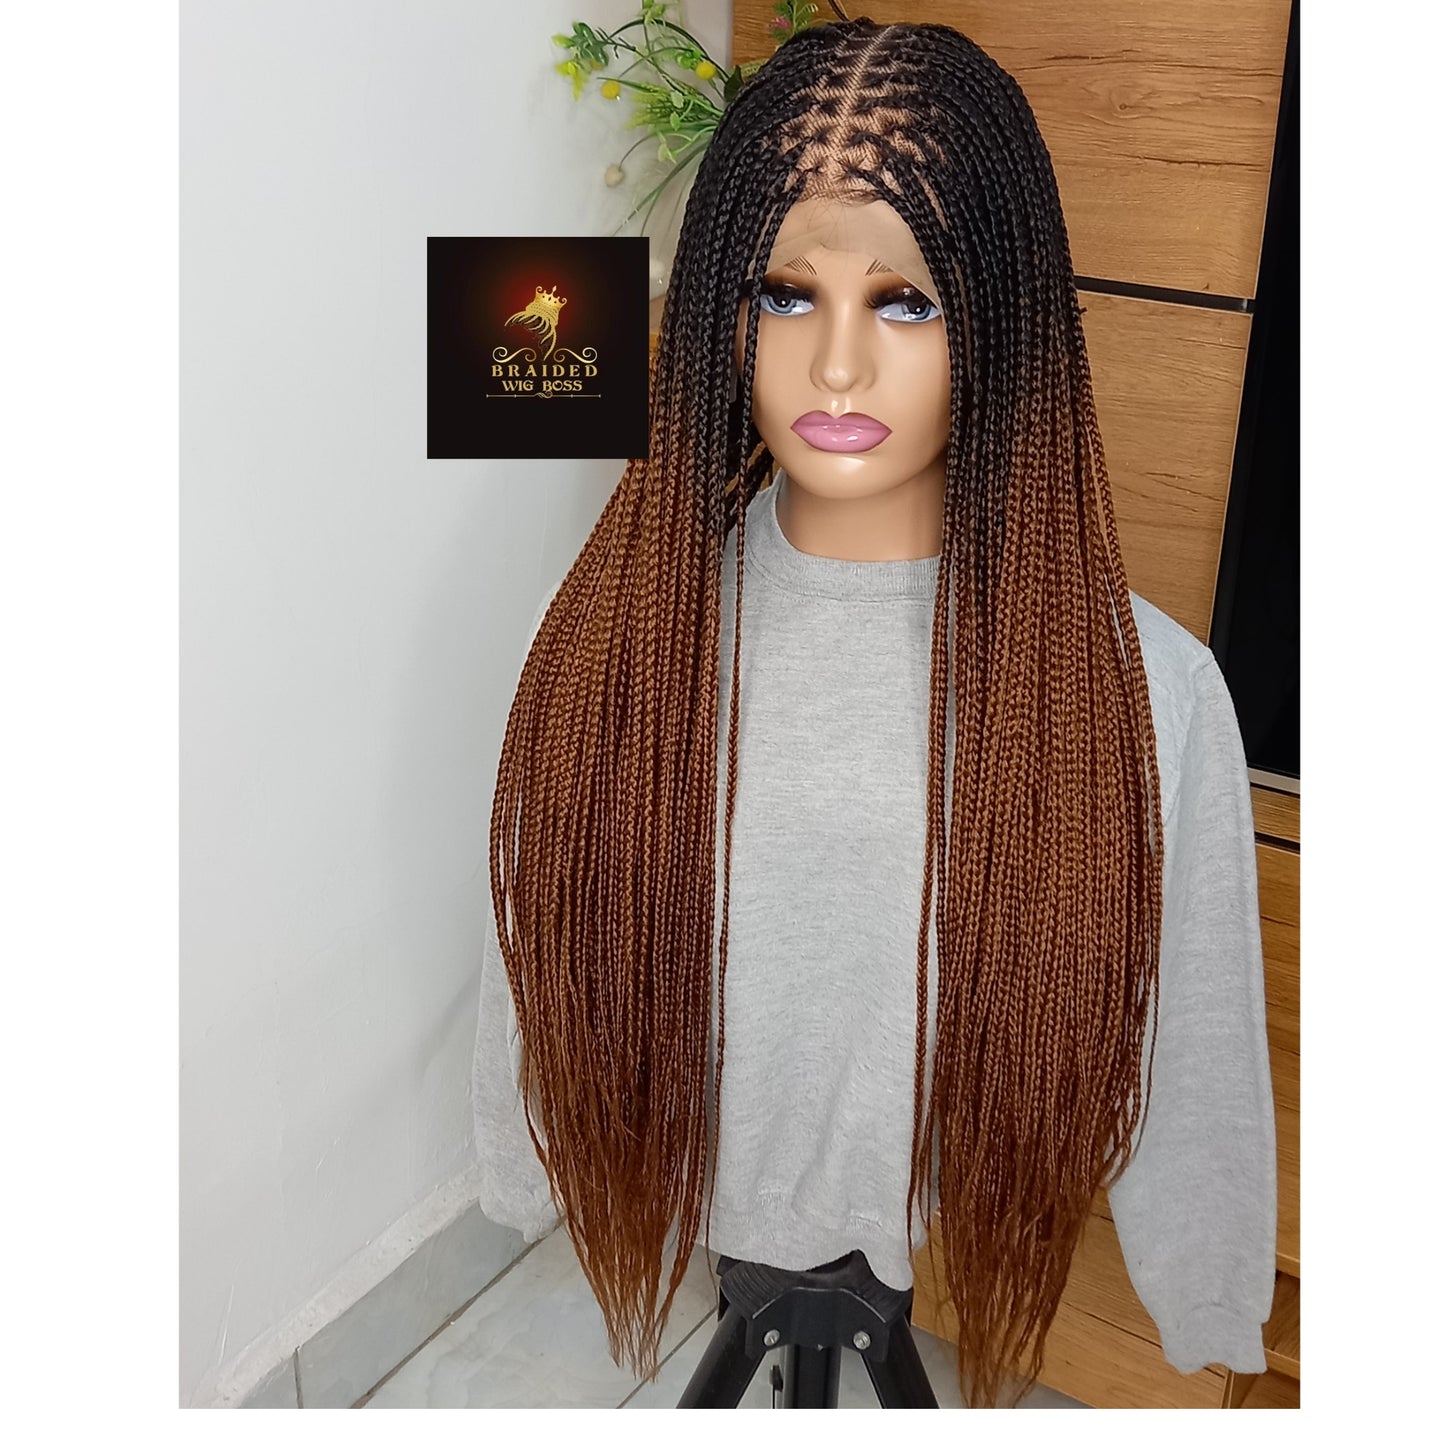 Upgrade Your Look with Our Ombre Knotless Braid Wig on Full Lace: Free Worldwide Shipping